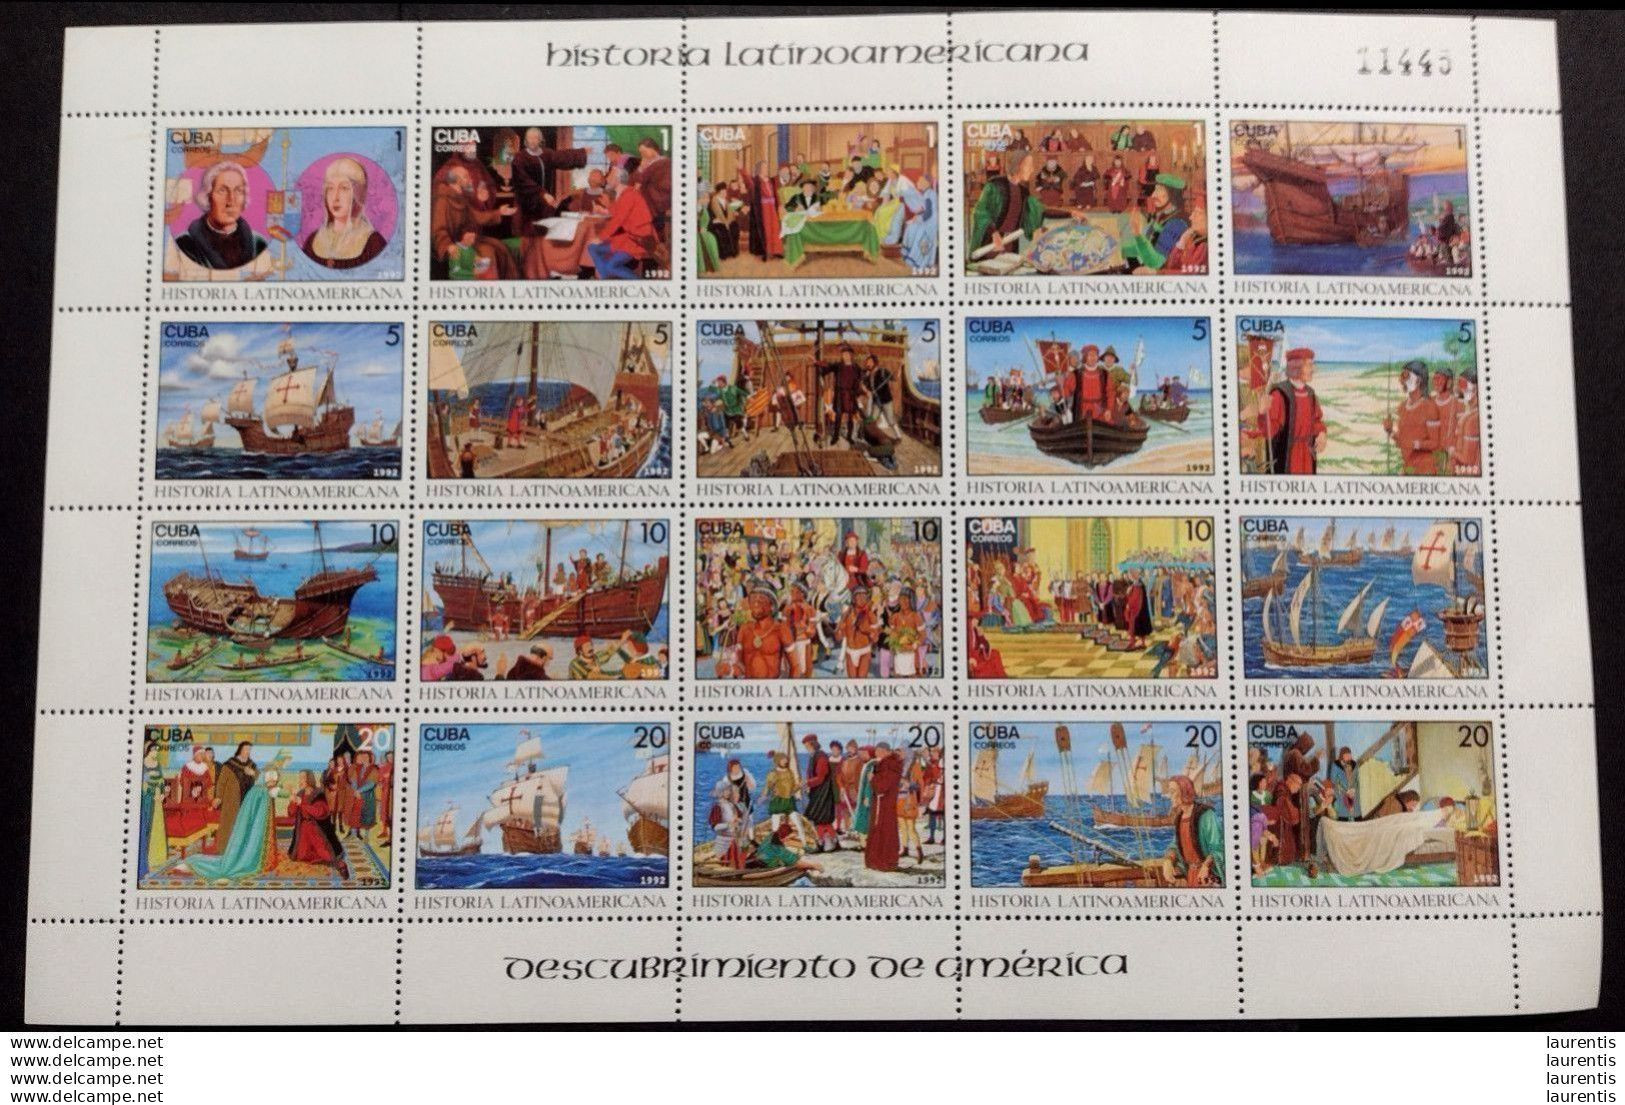 D19024  Colombus - Colón - Discovery Of America - Ships - Sheetlet 1992 - MNH - 3,35 - Christophe Colomb